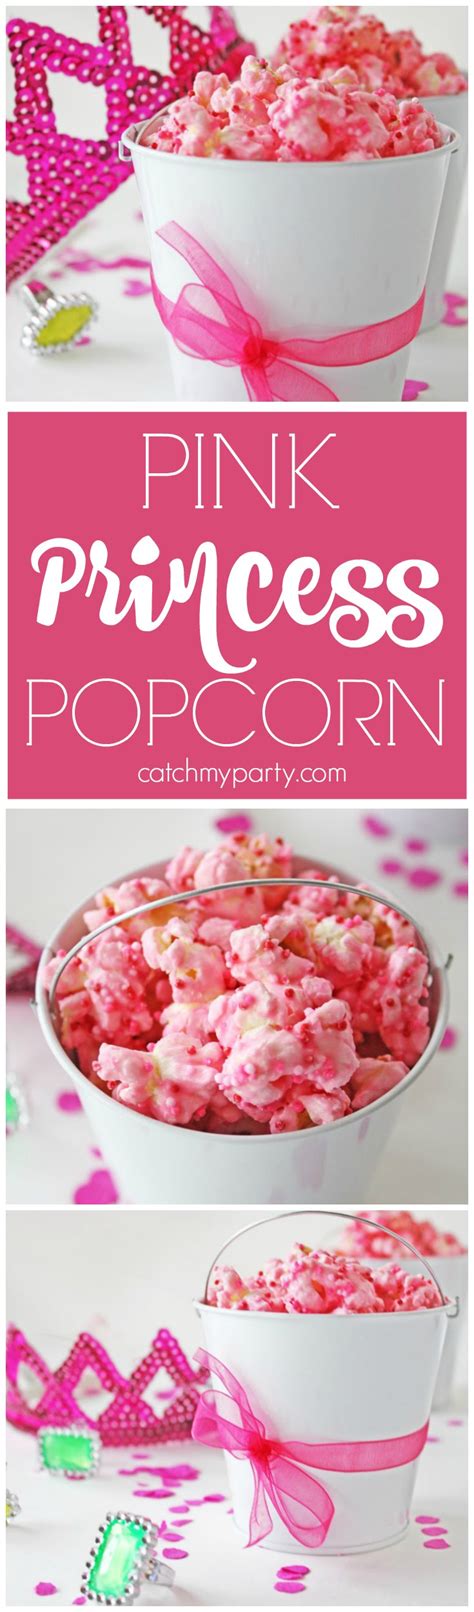 If the party happens to have a football theme, you can even shape the bread to look like a football. Pink Princess Popcorn | Catch My Party